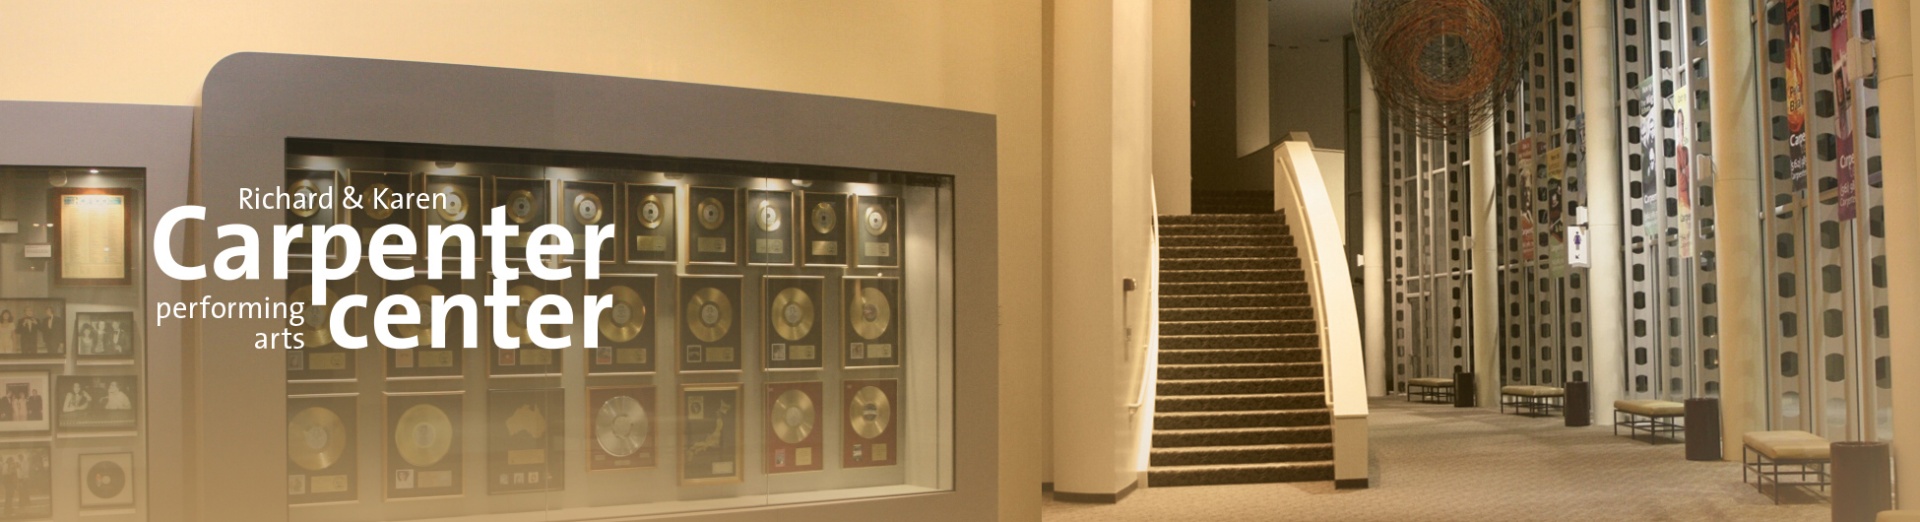 The interior of the Carpenter Center lobby with a case of gold records by the Carpenters visible along one wall.